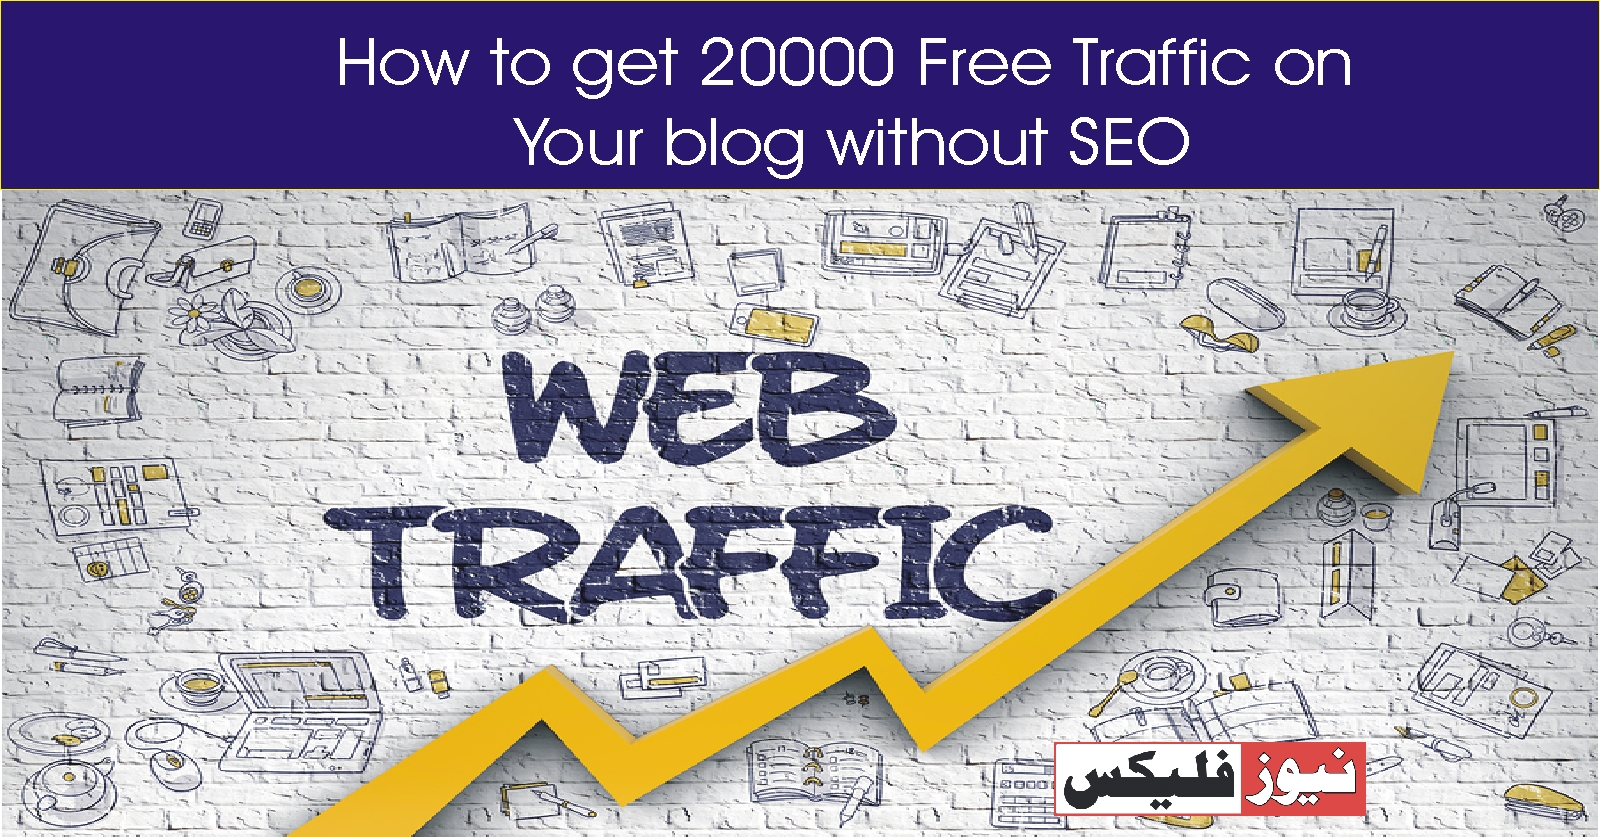 ؟How to get 20000 Free Traffic on Your blog without SEO